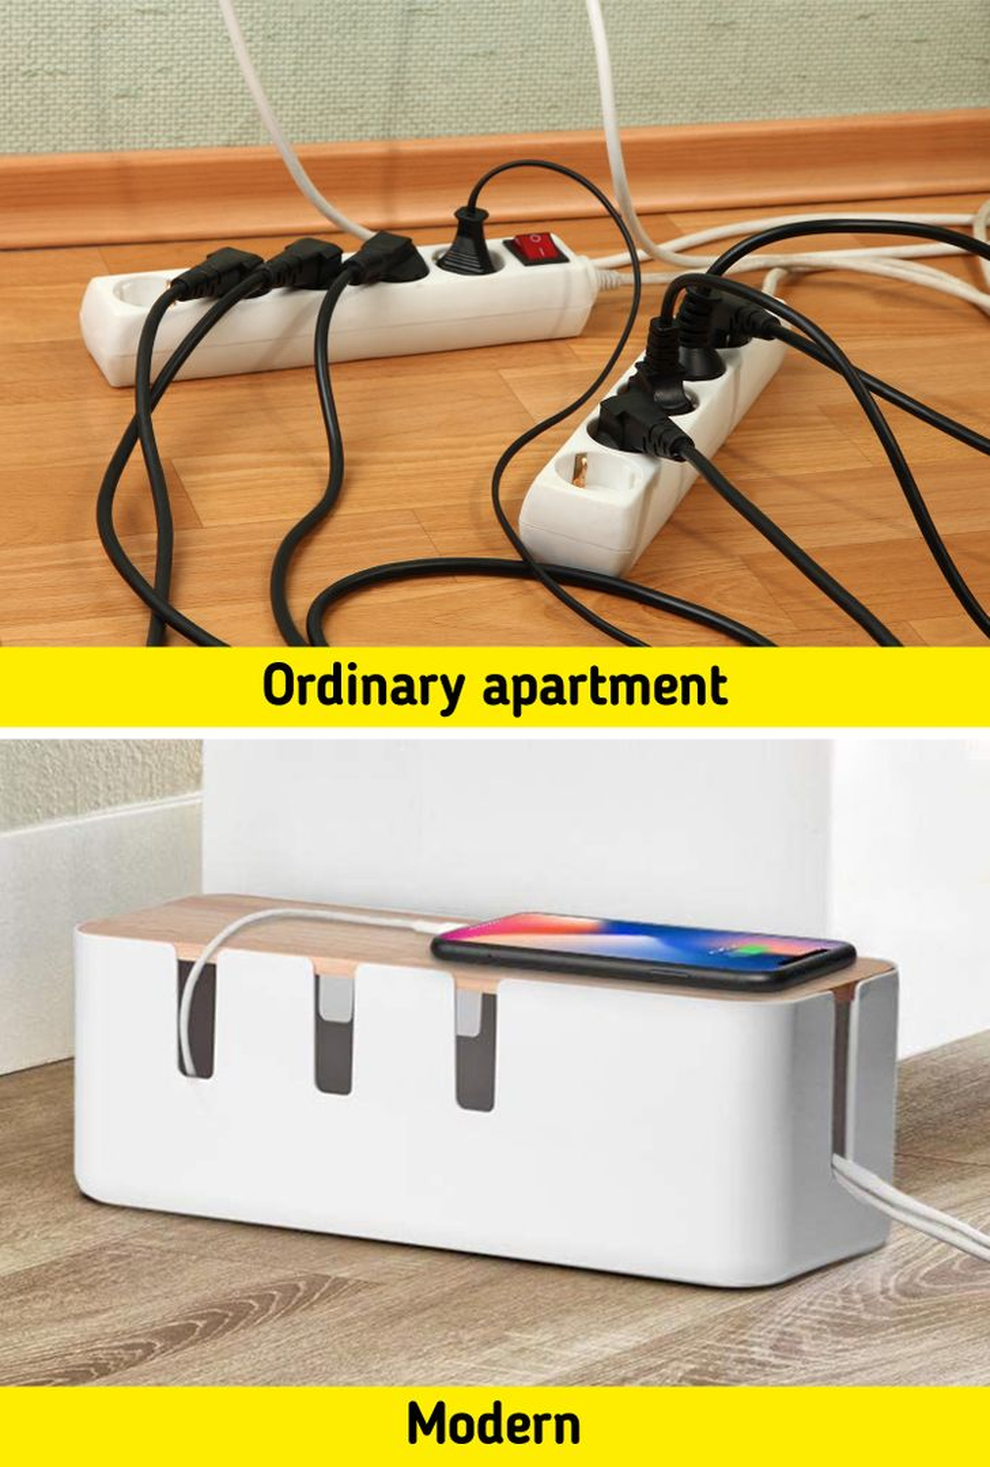 Turn an ordinary apartment into a modern one with just 10 simple objects - 10